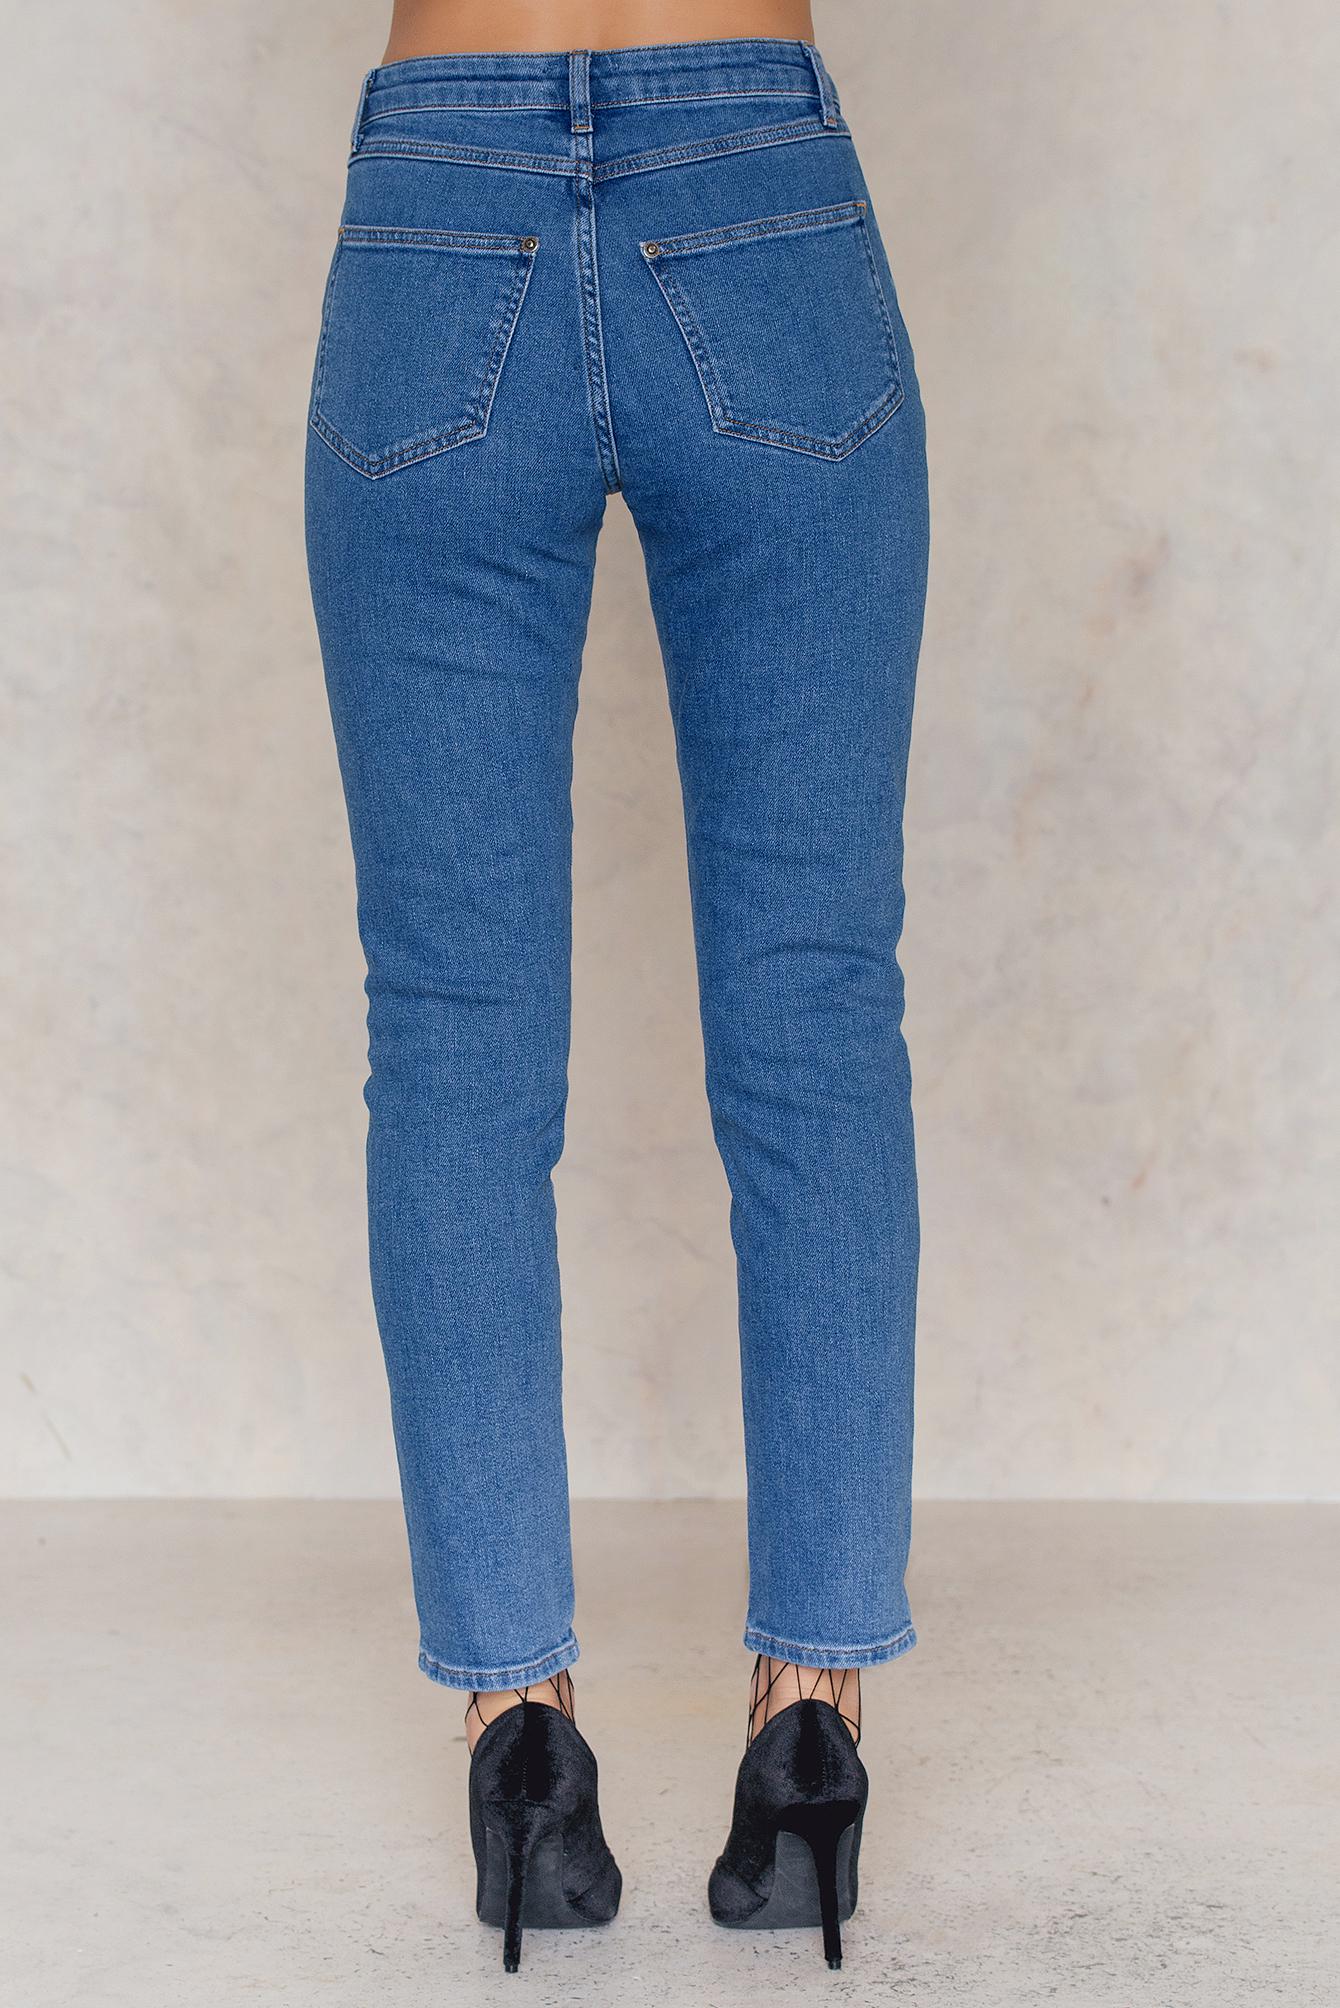 Lyst - Gestuz Cecily Jeans in Blue